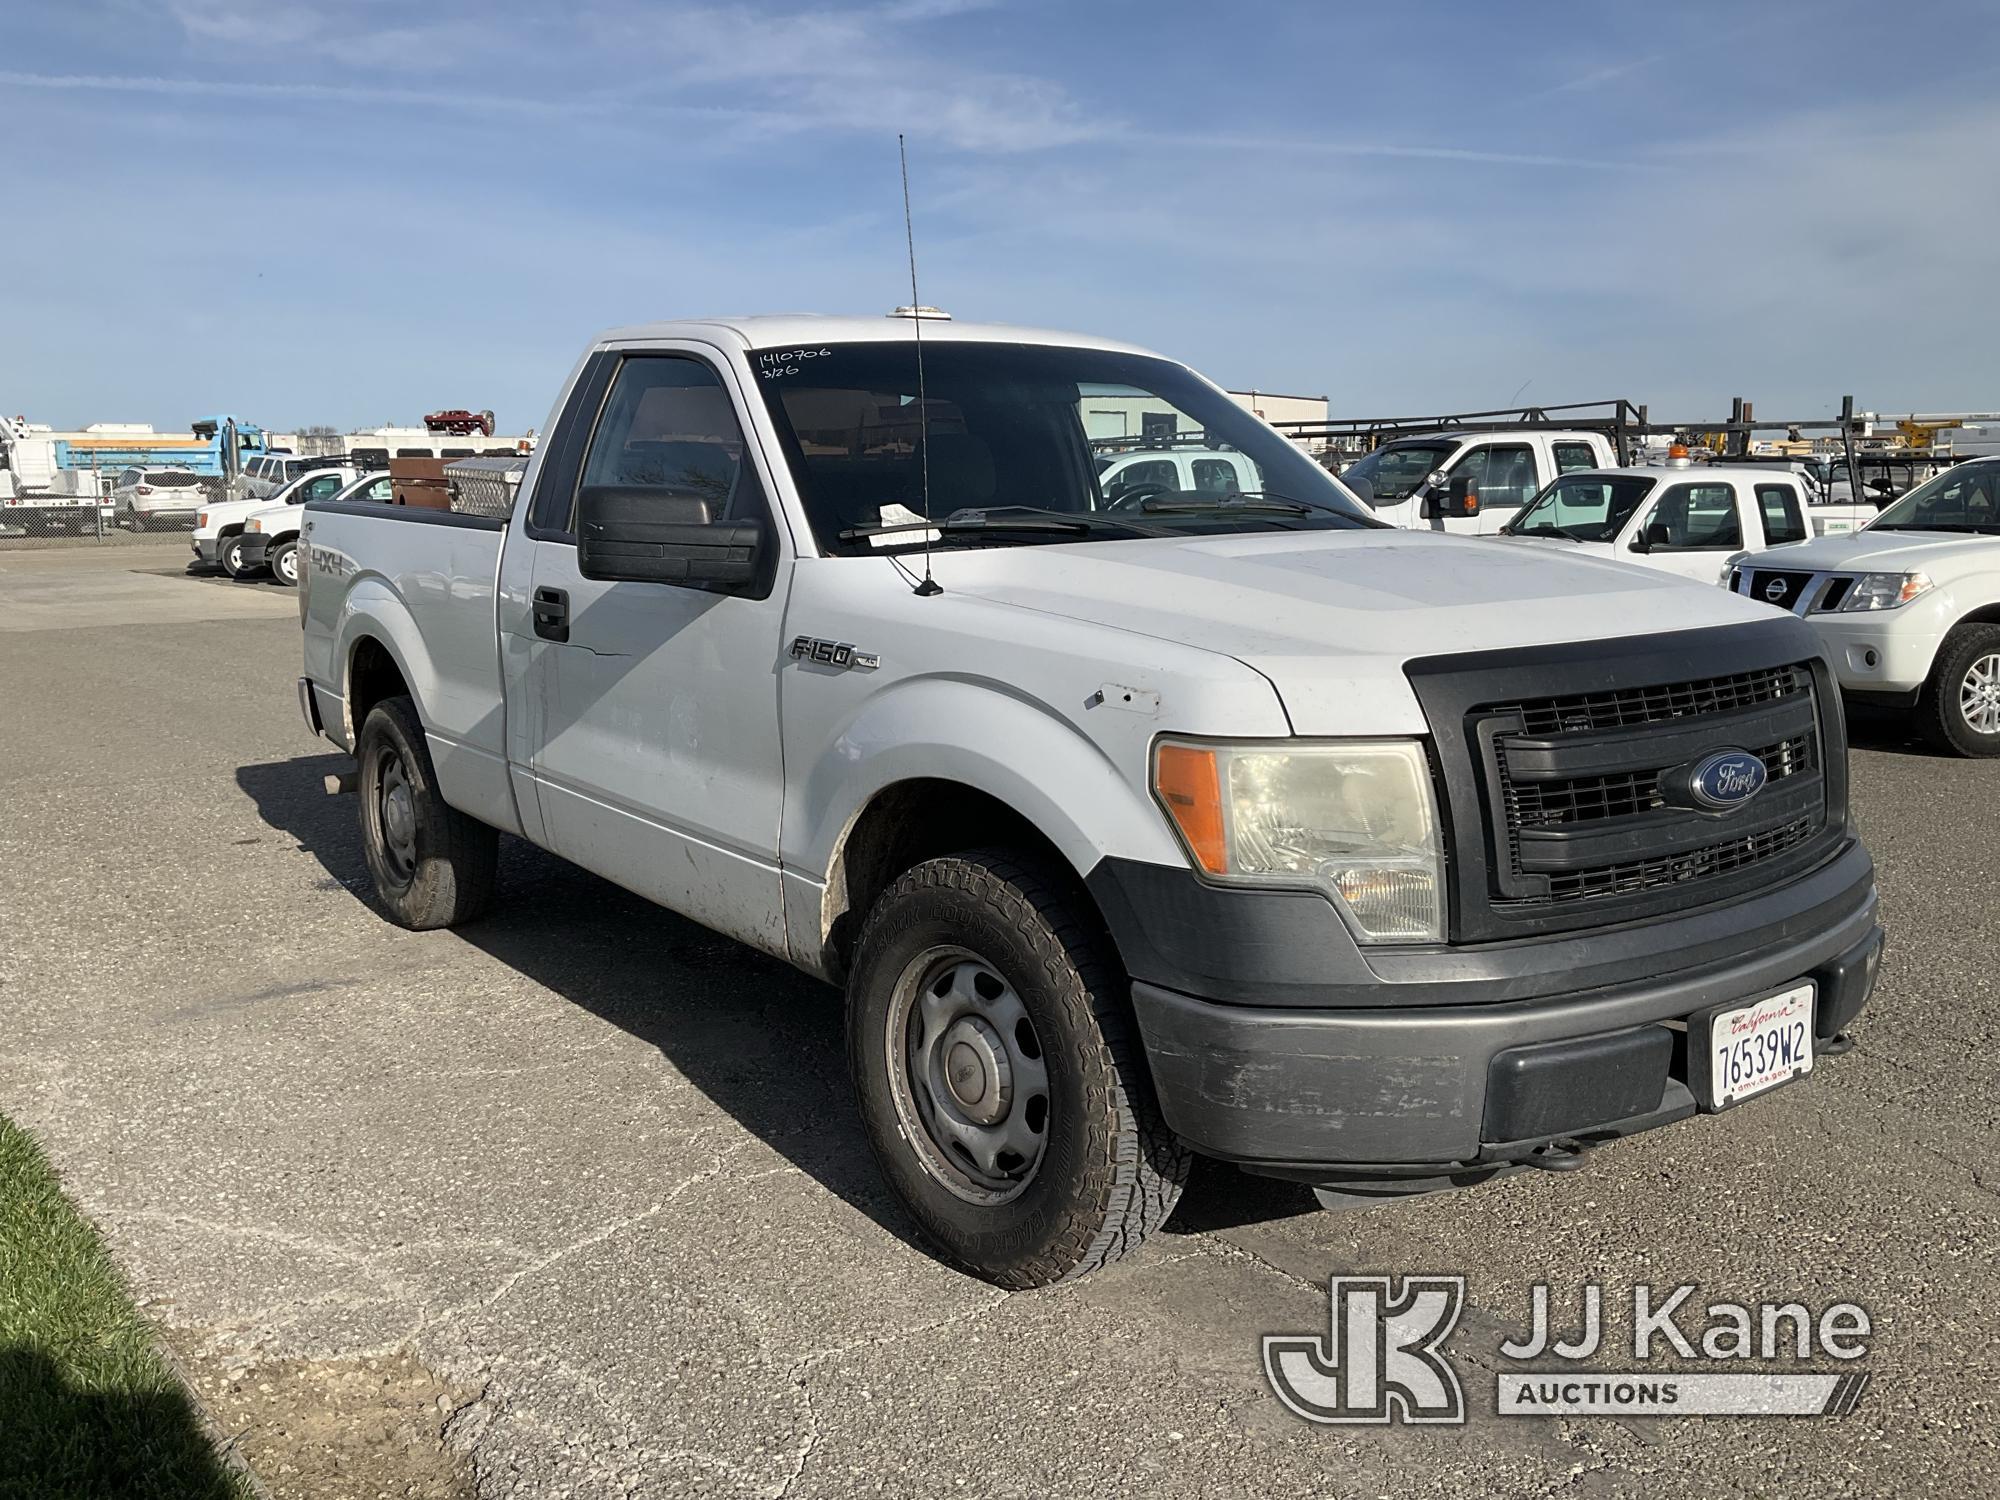 (Dixon, CA) 2013 Ford F150 4x4 Pickup Truck Runs & Moves, Engine Monitors, Stereo Not Working